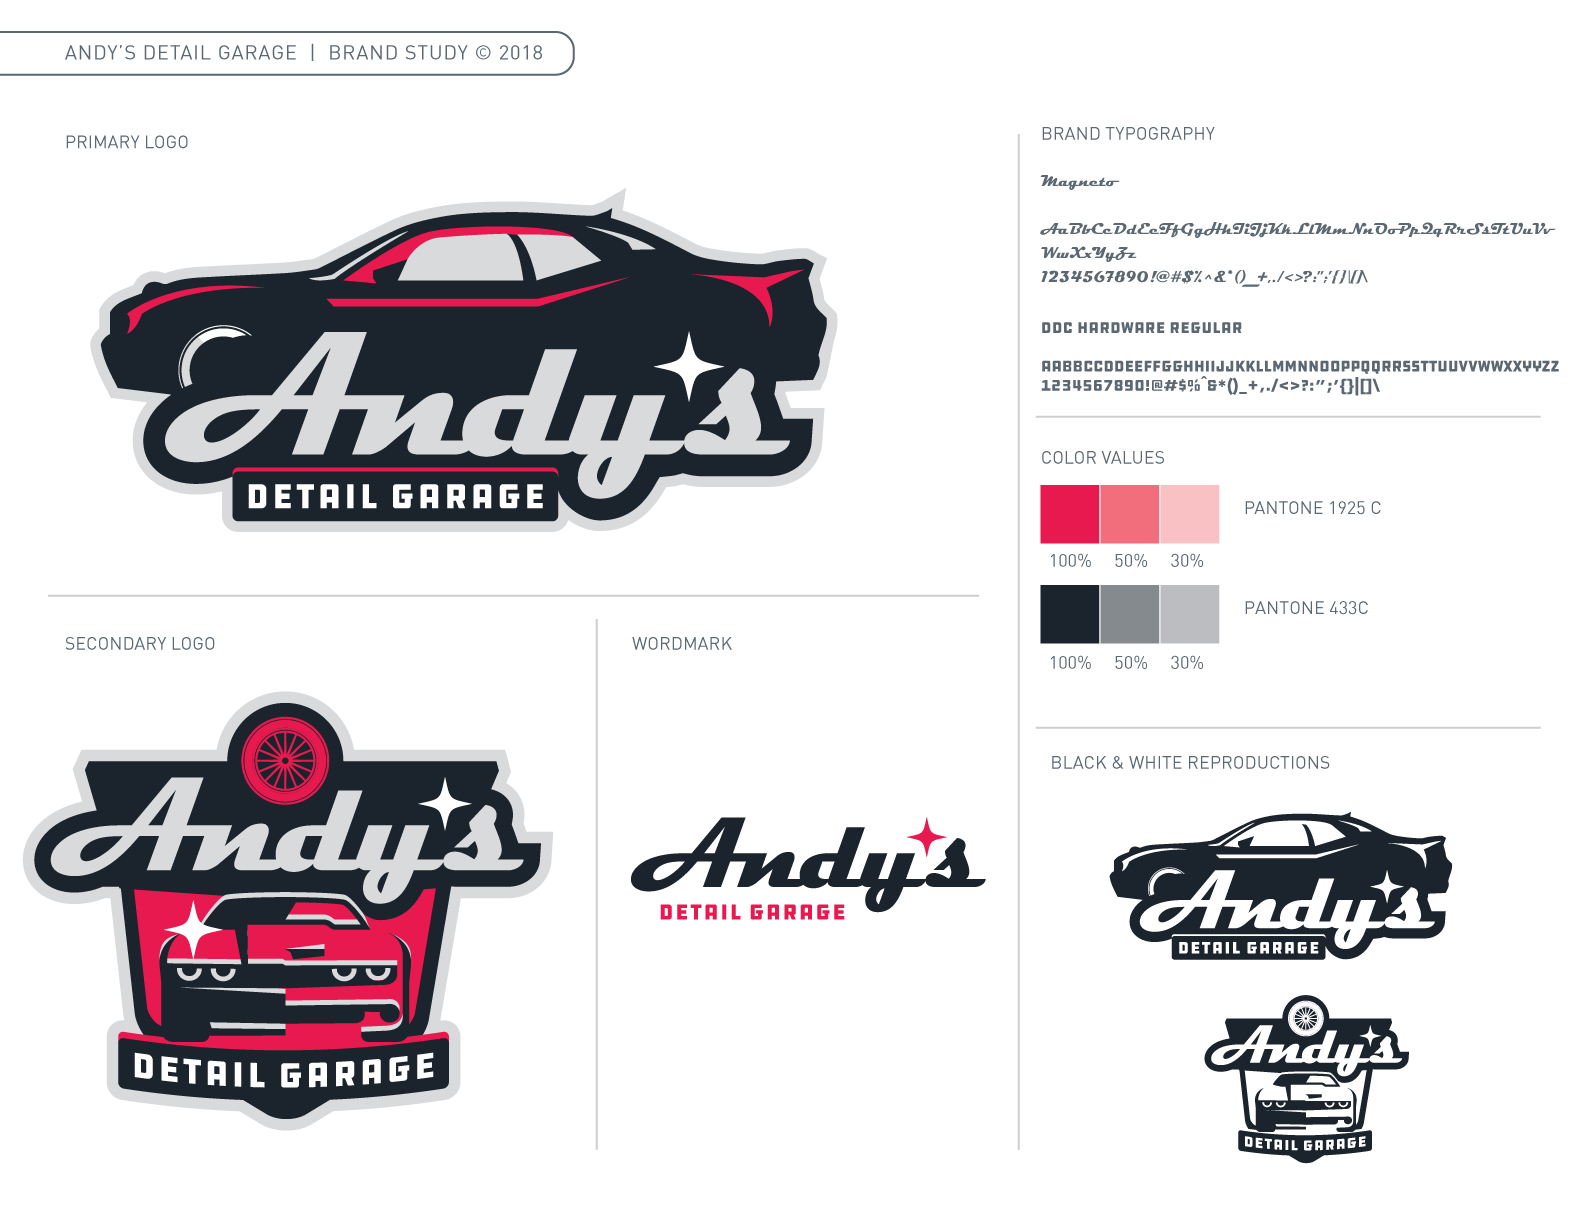 Andy's Detail Garage Brand Guide